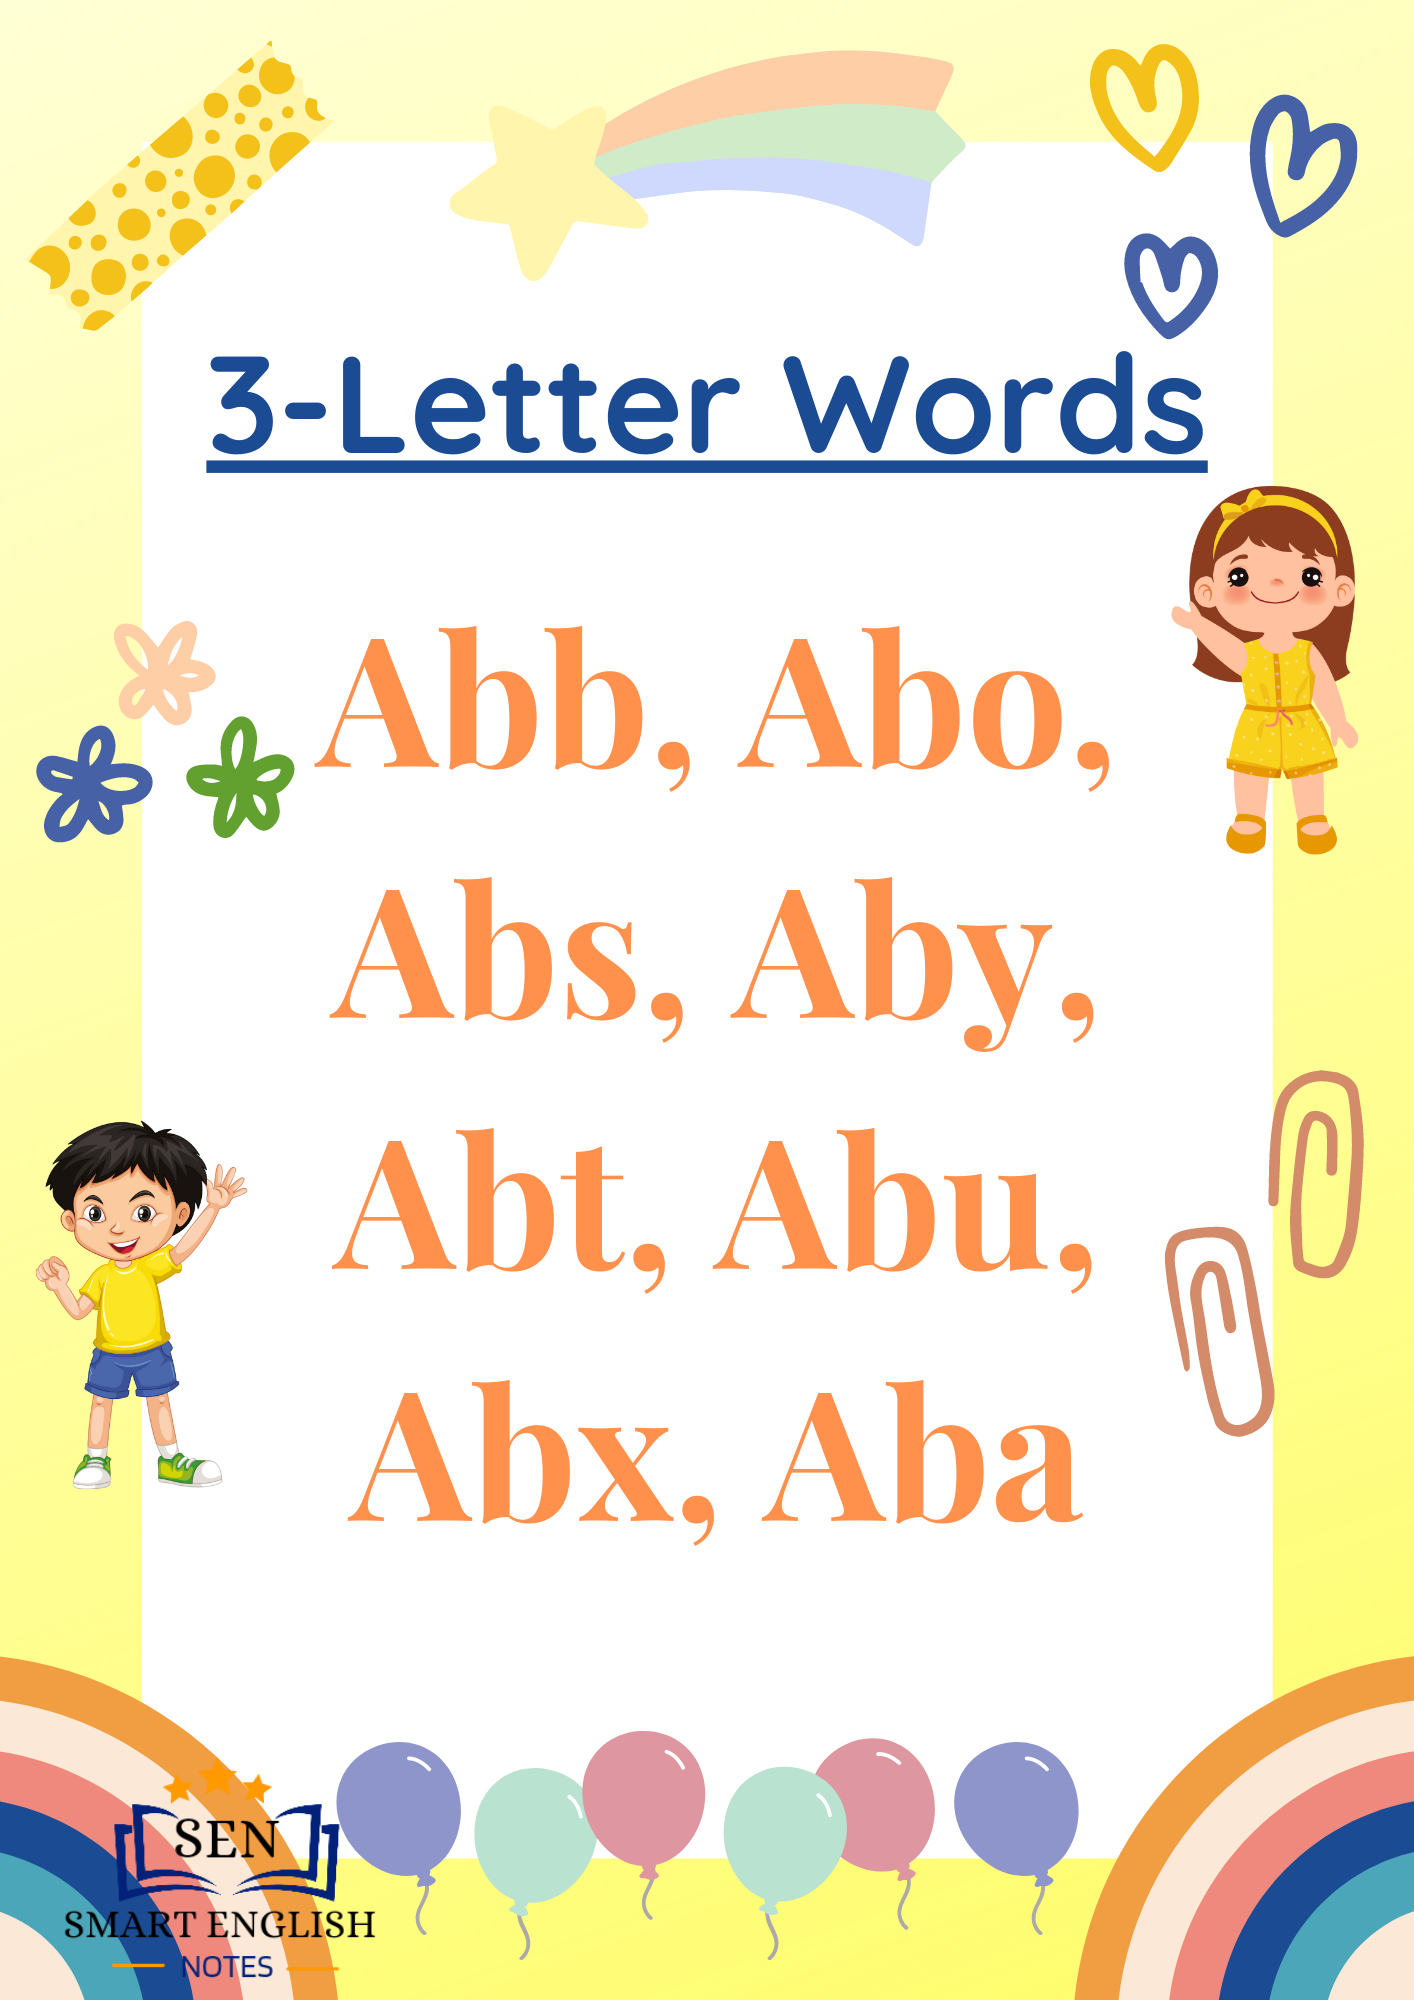 3-letter words starting with ab